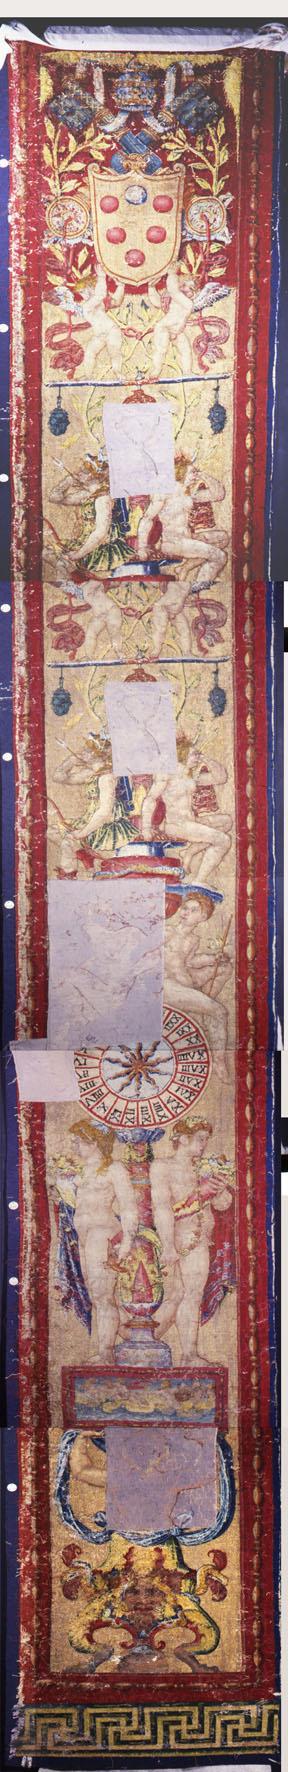 Frieze of the Hours, 1517–1521. (Governorship SCV-Directorate of Museums)